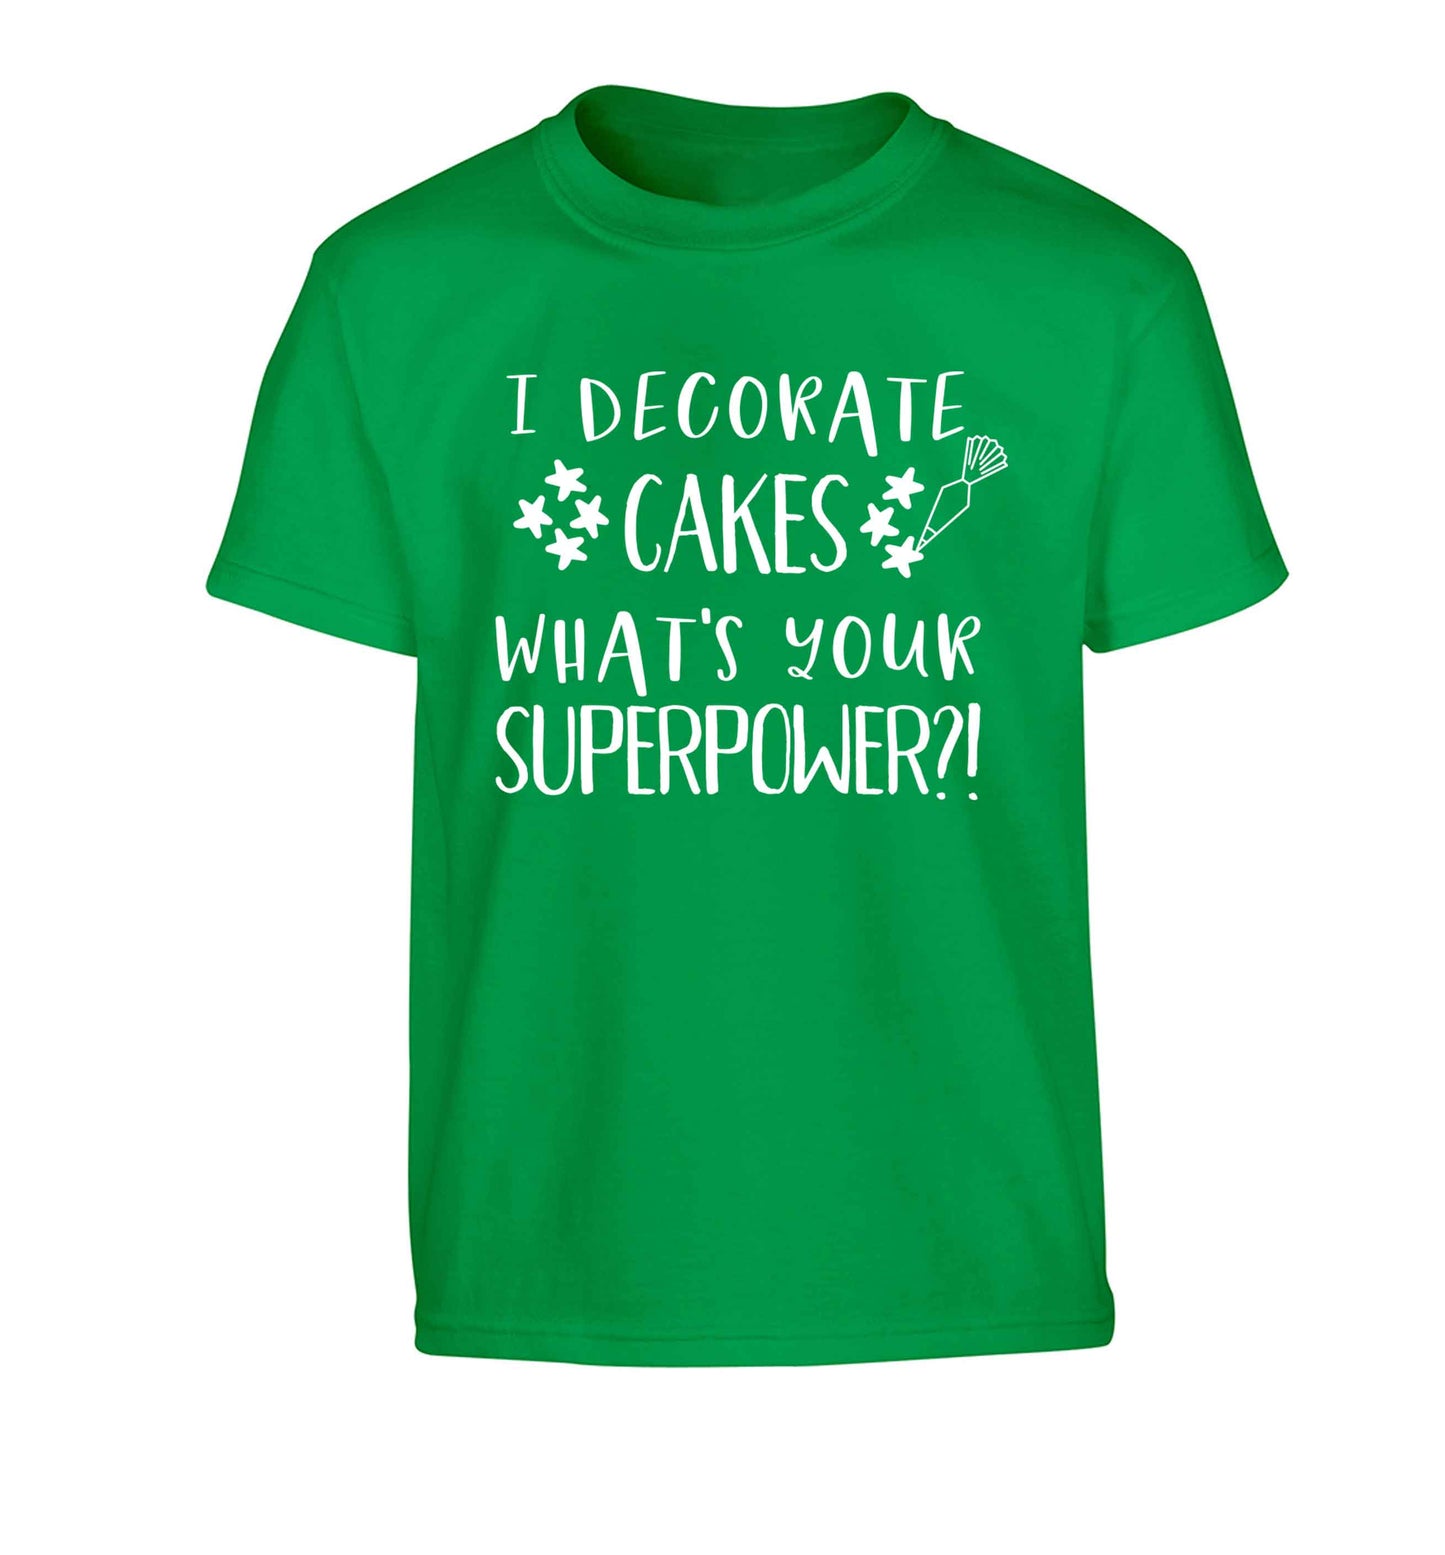 I decorate cakes what's your superpower?! Children's green Tshirt 12-13 Years